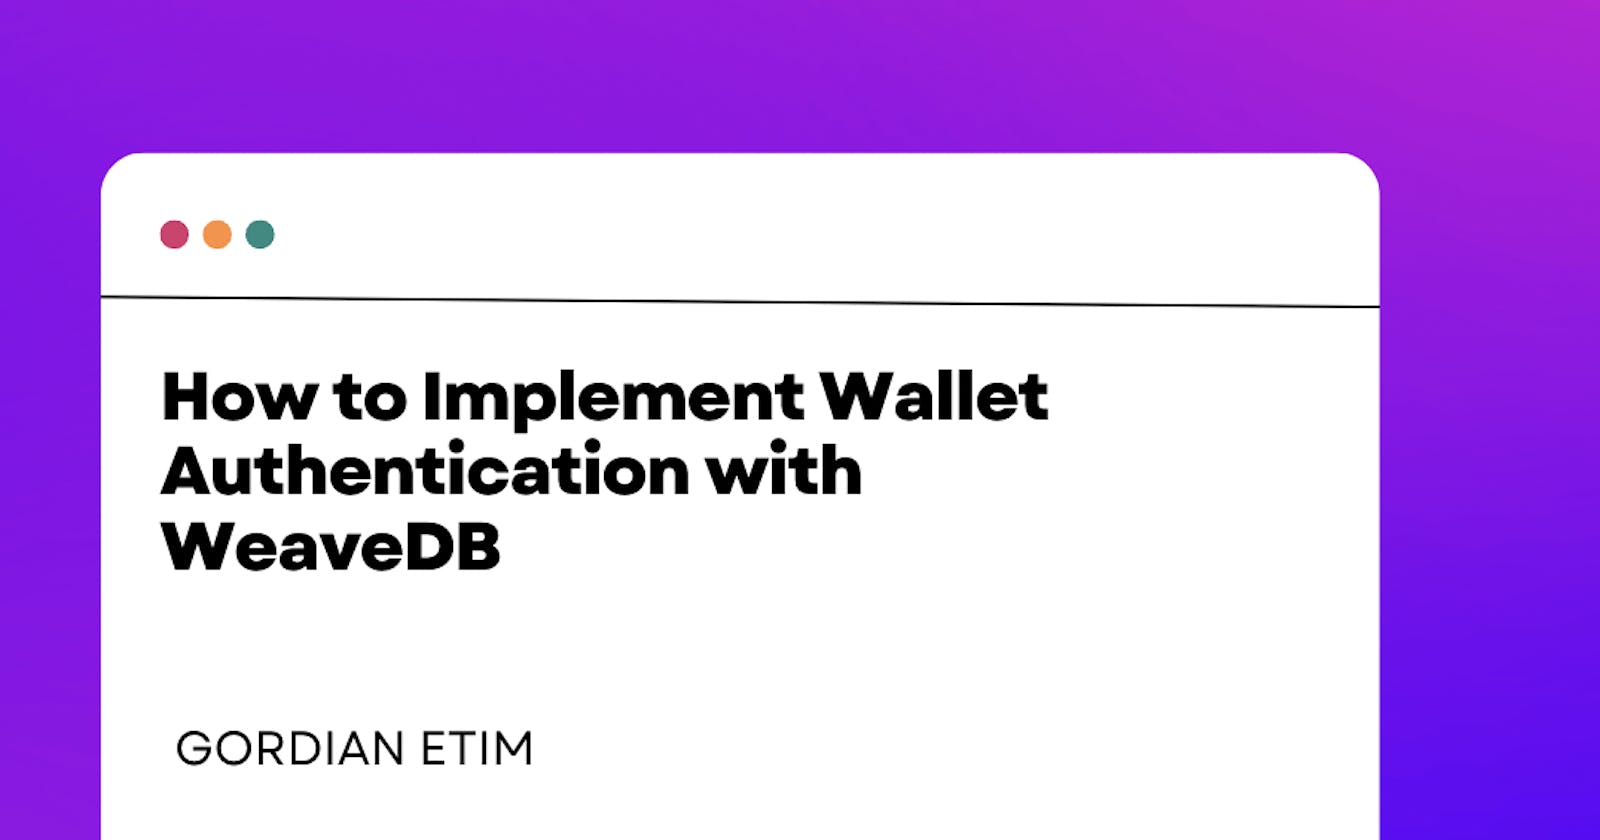 How to Implement Wallet Authentication with WeaveDB